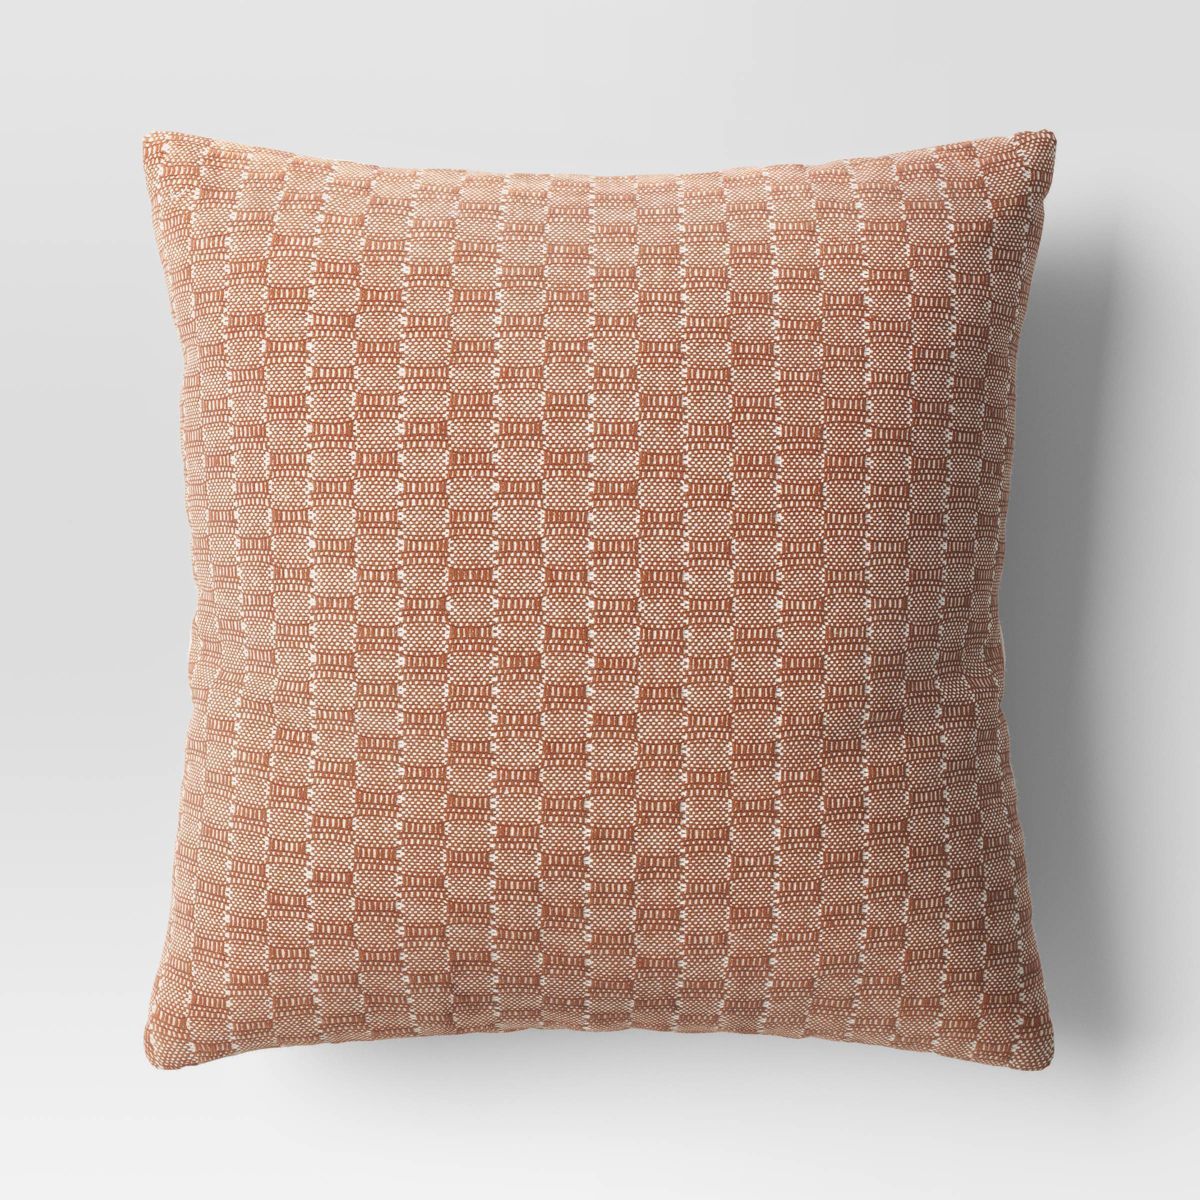 Oversized Textural Woven Square Throw Pillow - Threshold™ | Target